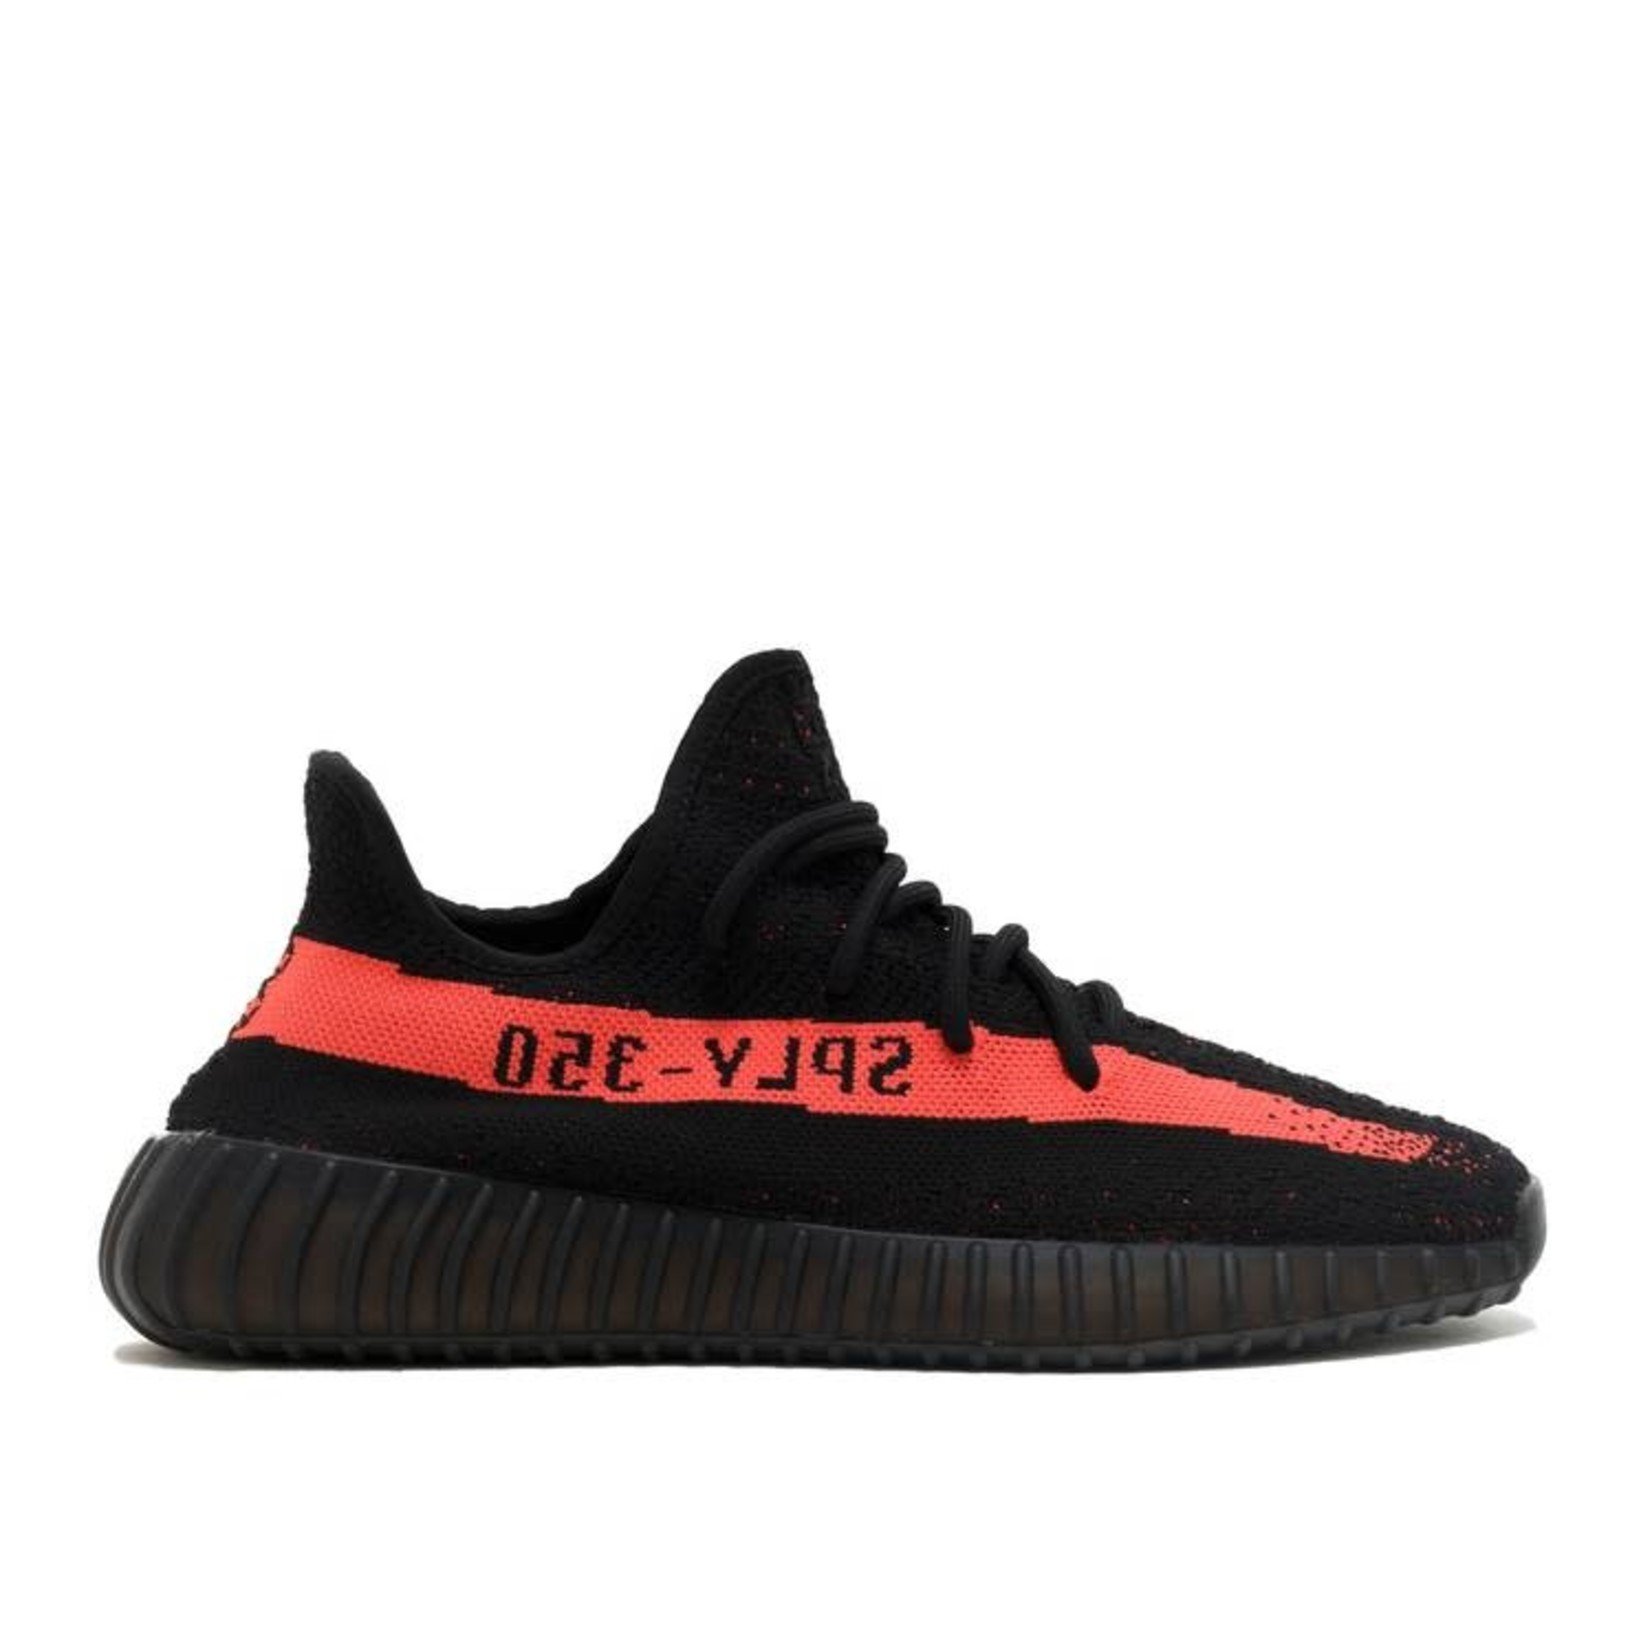 Adidas Adidas Yeezy Boost 350 V2 Core Black Red (2016/2022) Size 10, DS BRAND NEW